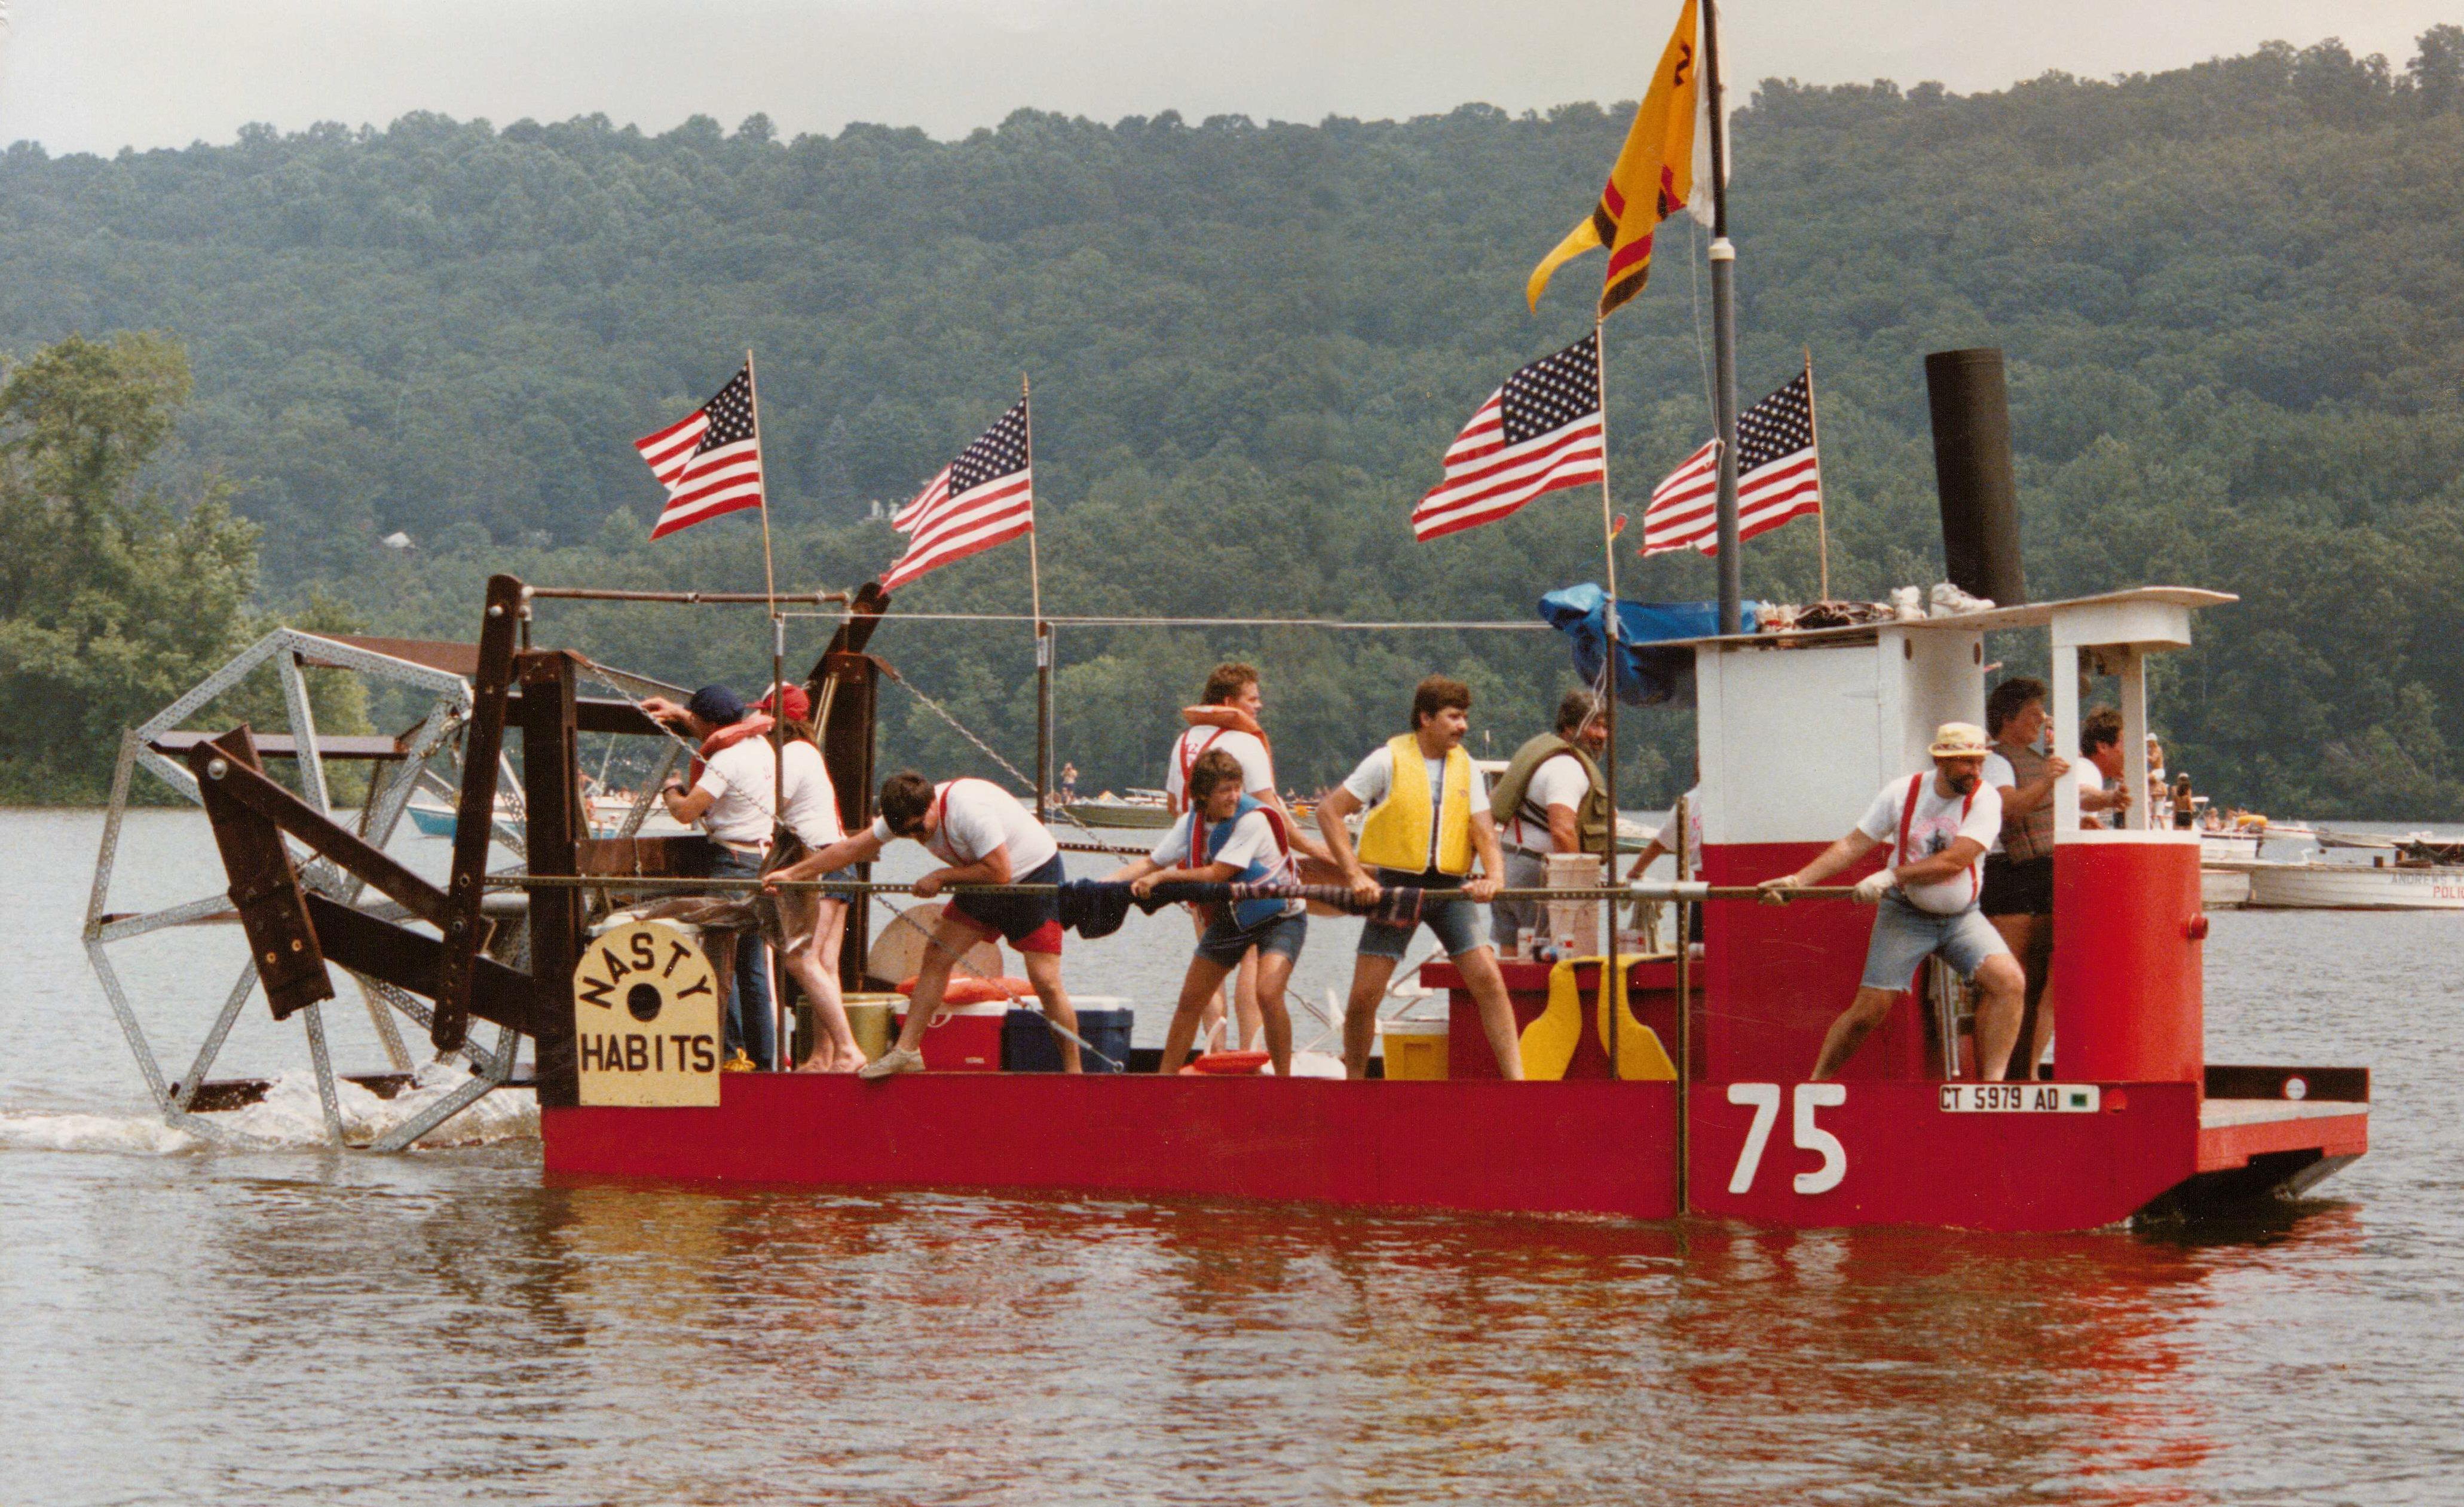 Historical Records - The Connecticut River Raft Race